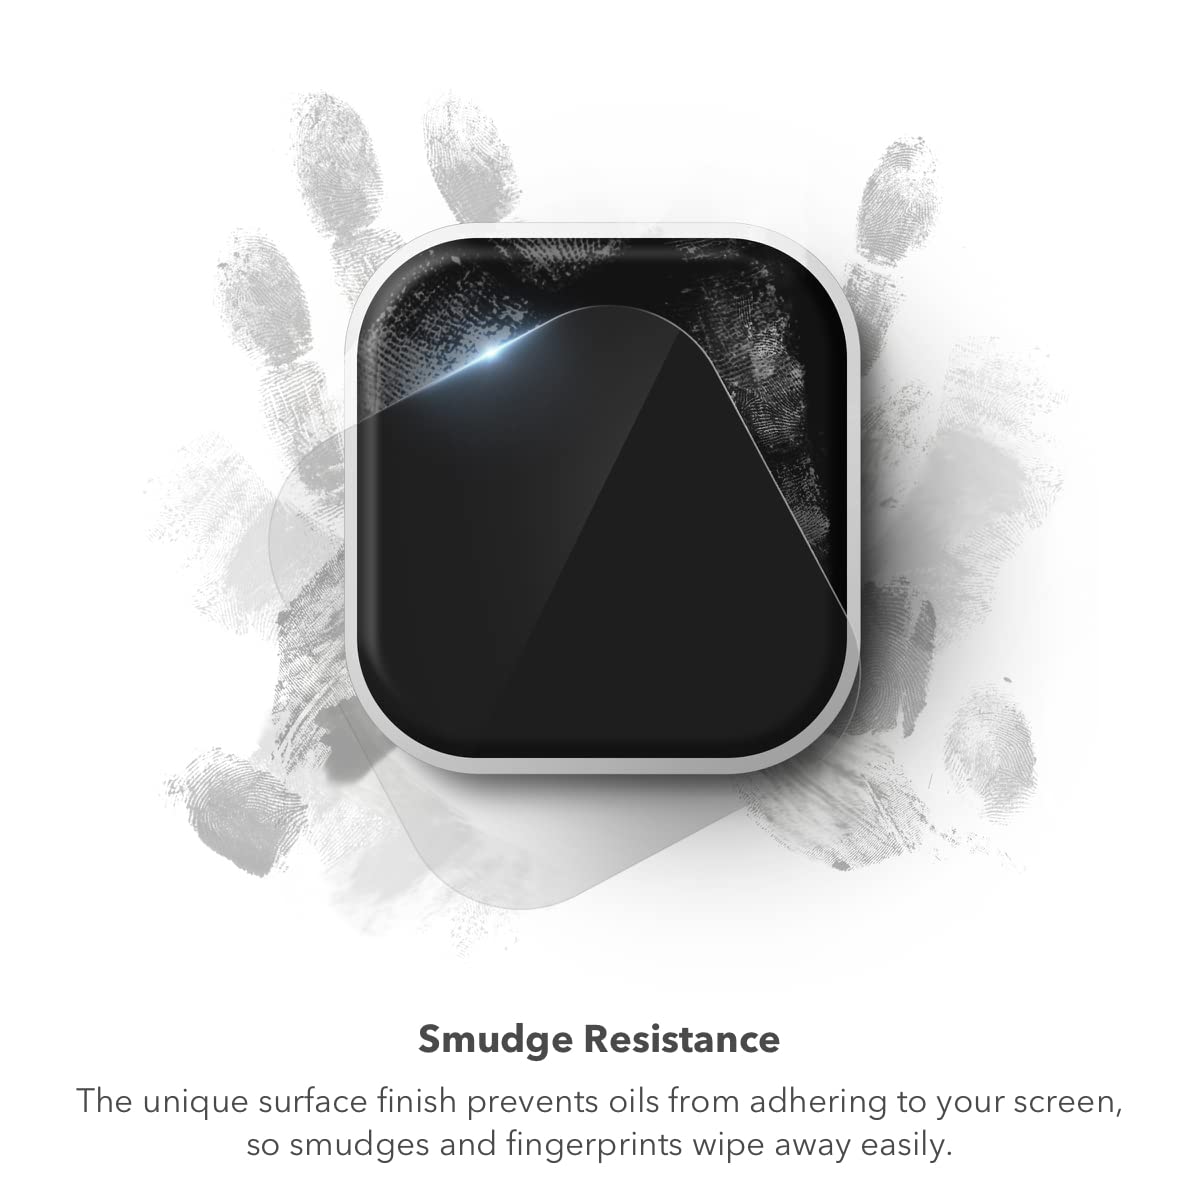 ZAGG InvisibleShield Glass Elite 360 for Apple Watch Series 7 & Series 8, Watch Size: 41mm Face, Integrated Bumper and Screen Protector for 360-degree protection – Advanced clarity